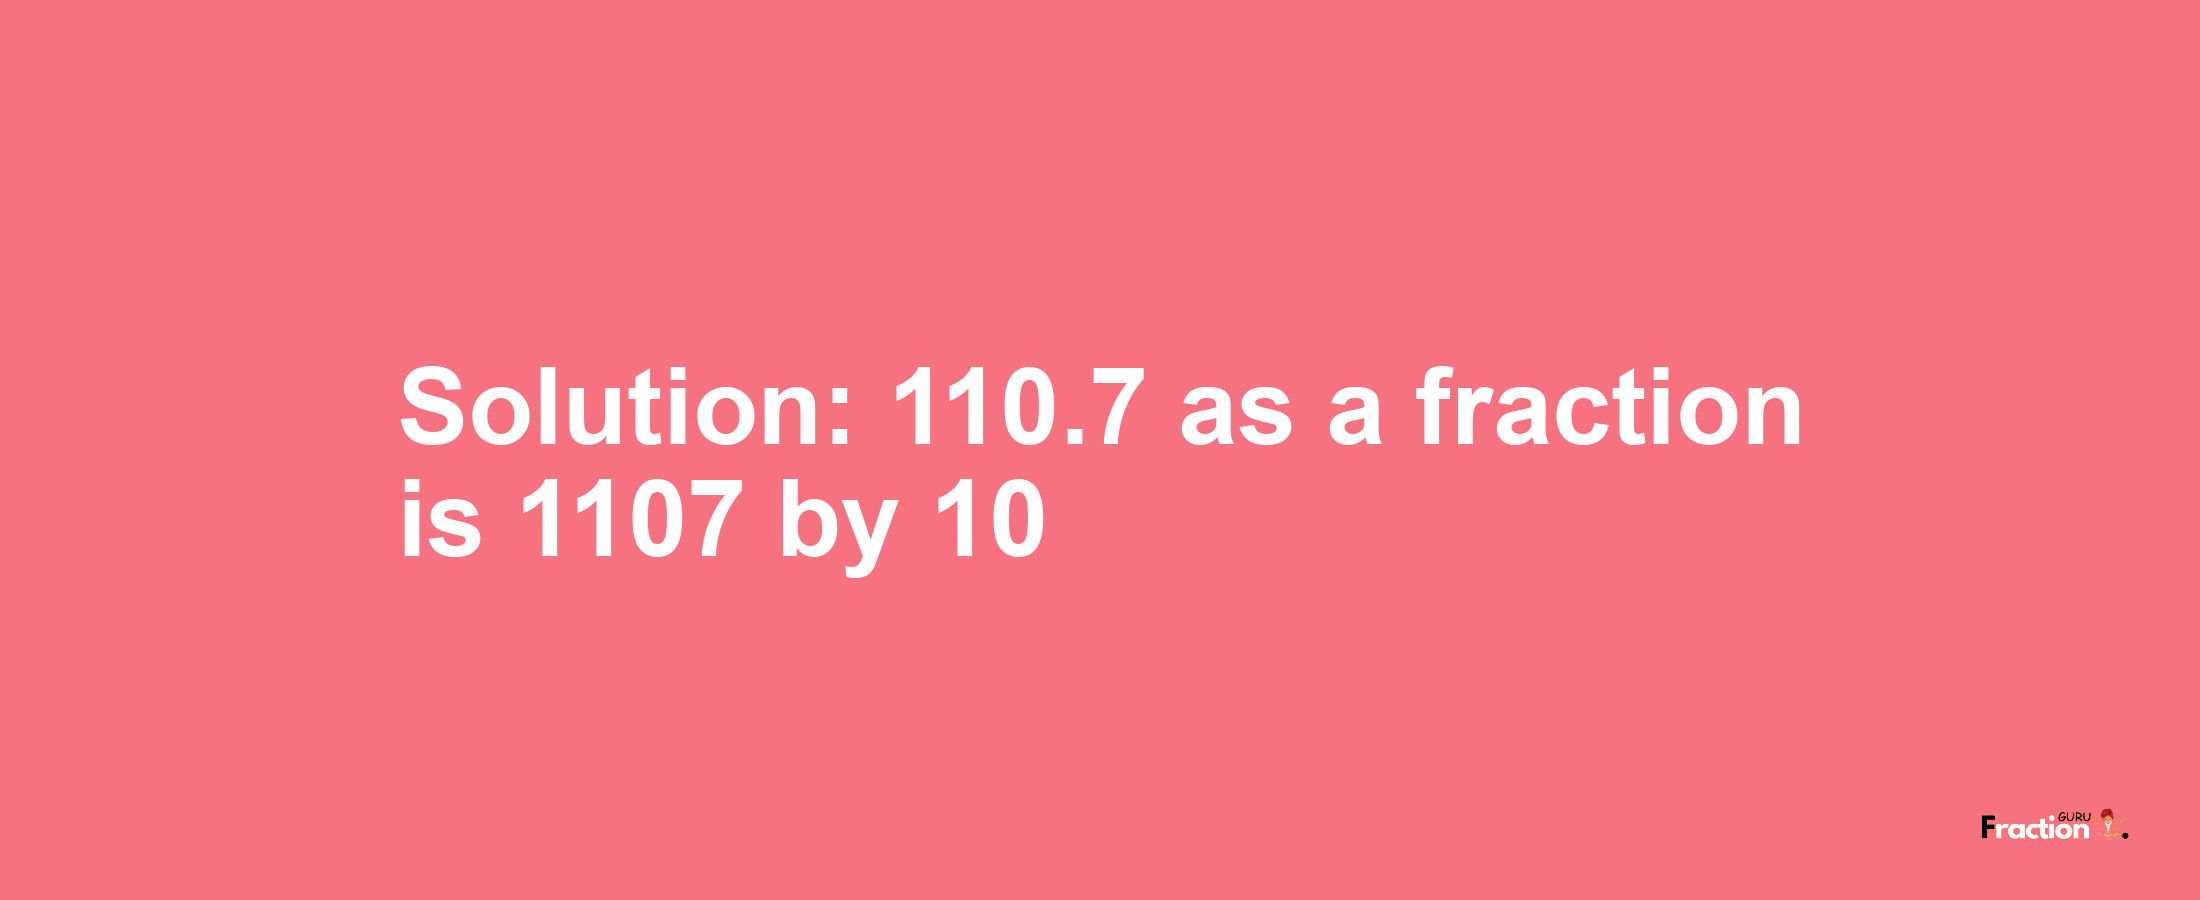 Solution:110.7 as a fraction is 1107/10